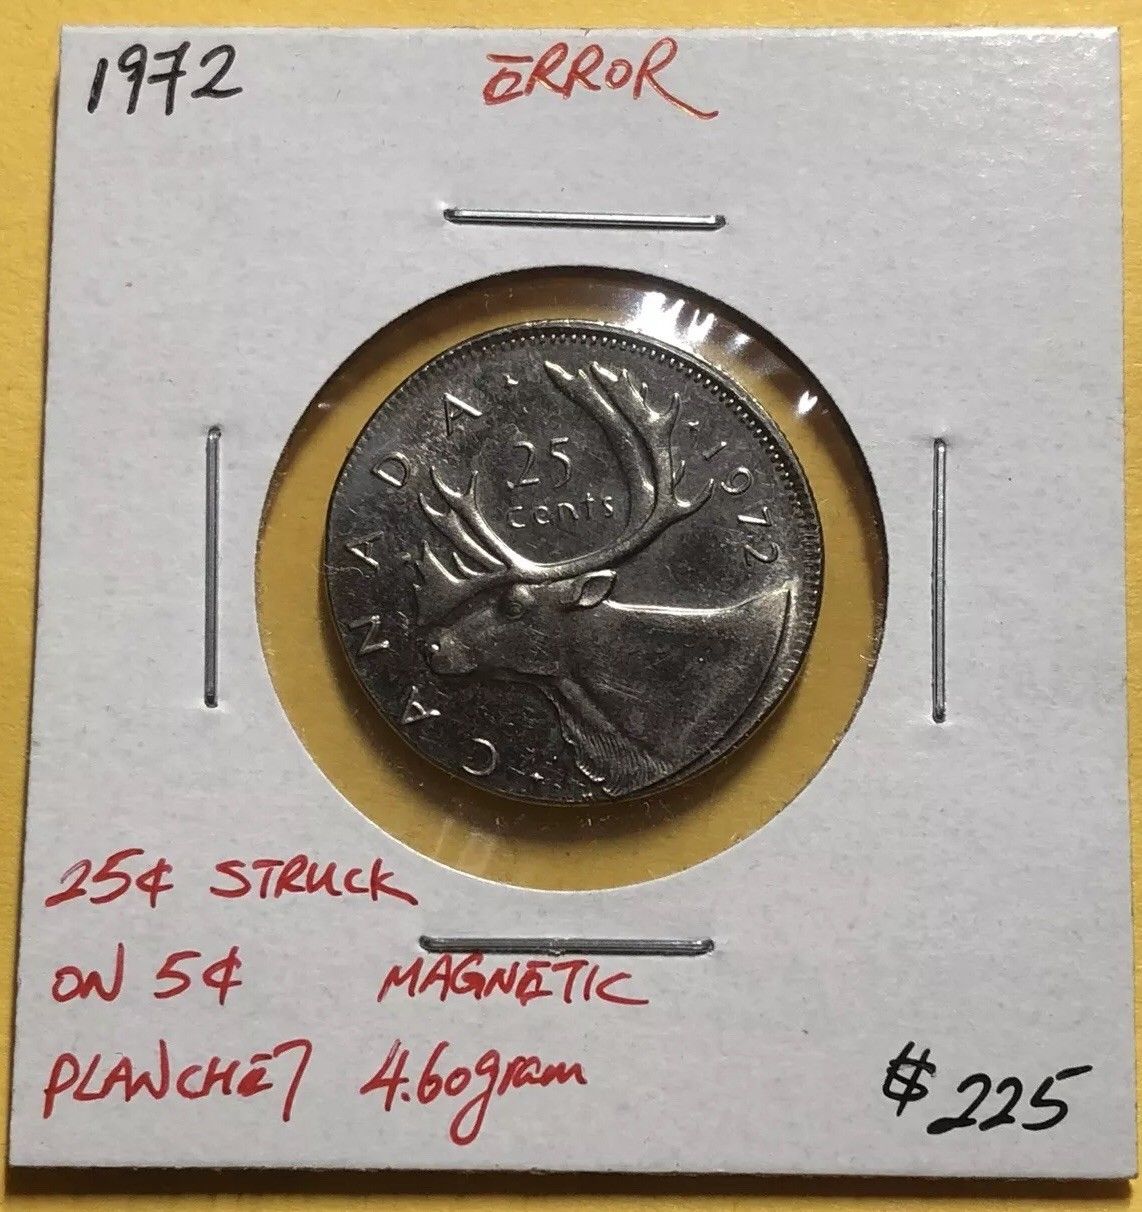 Canada 1972 25 Cent Struck On 5 Cent Planchet | Coin Talk